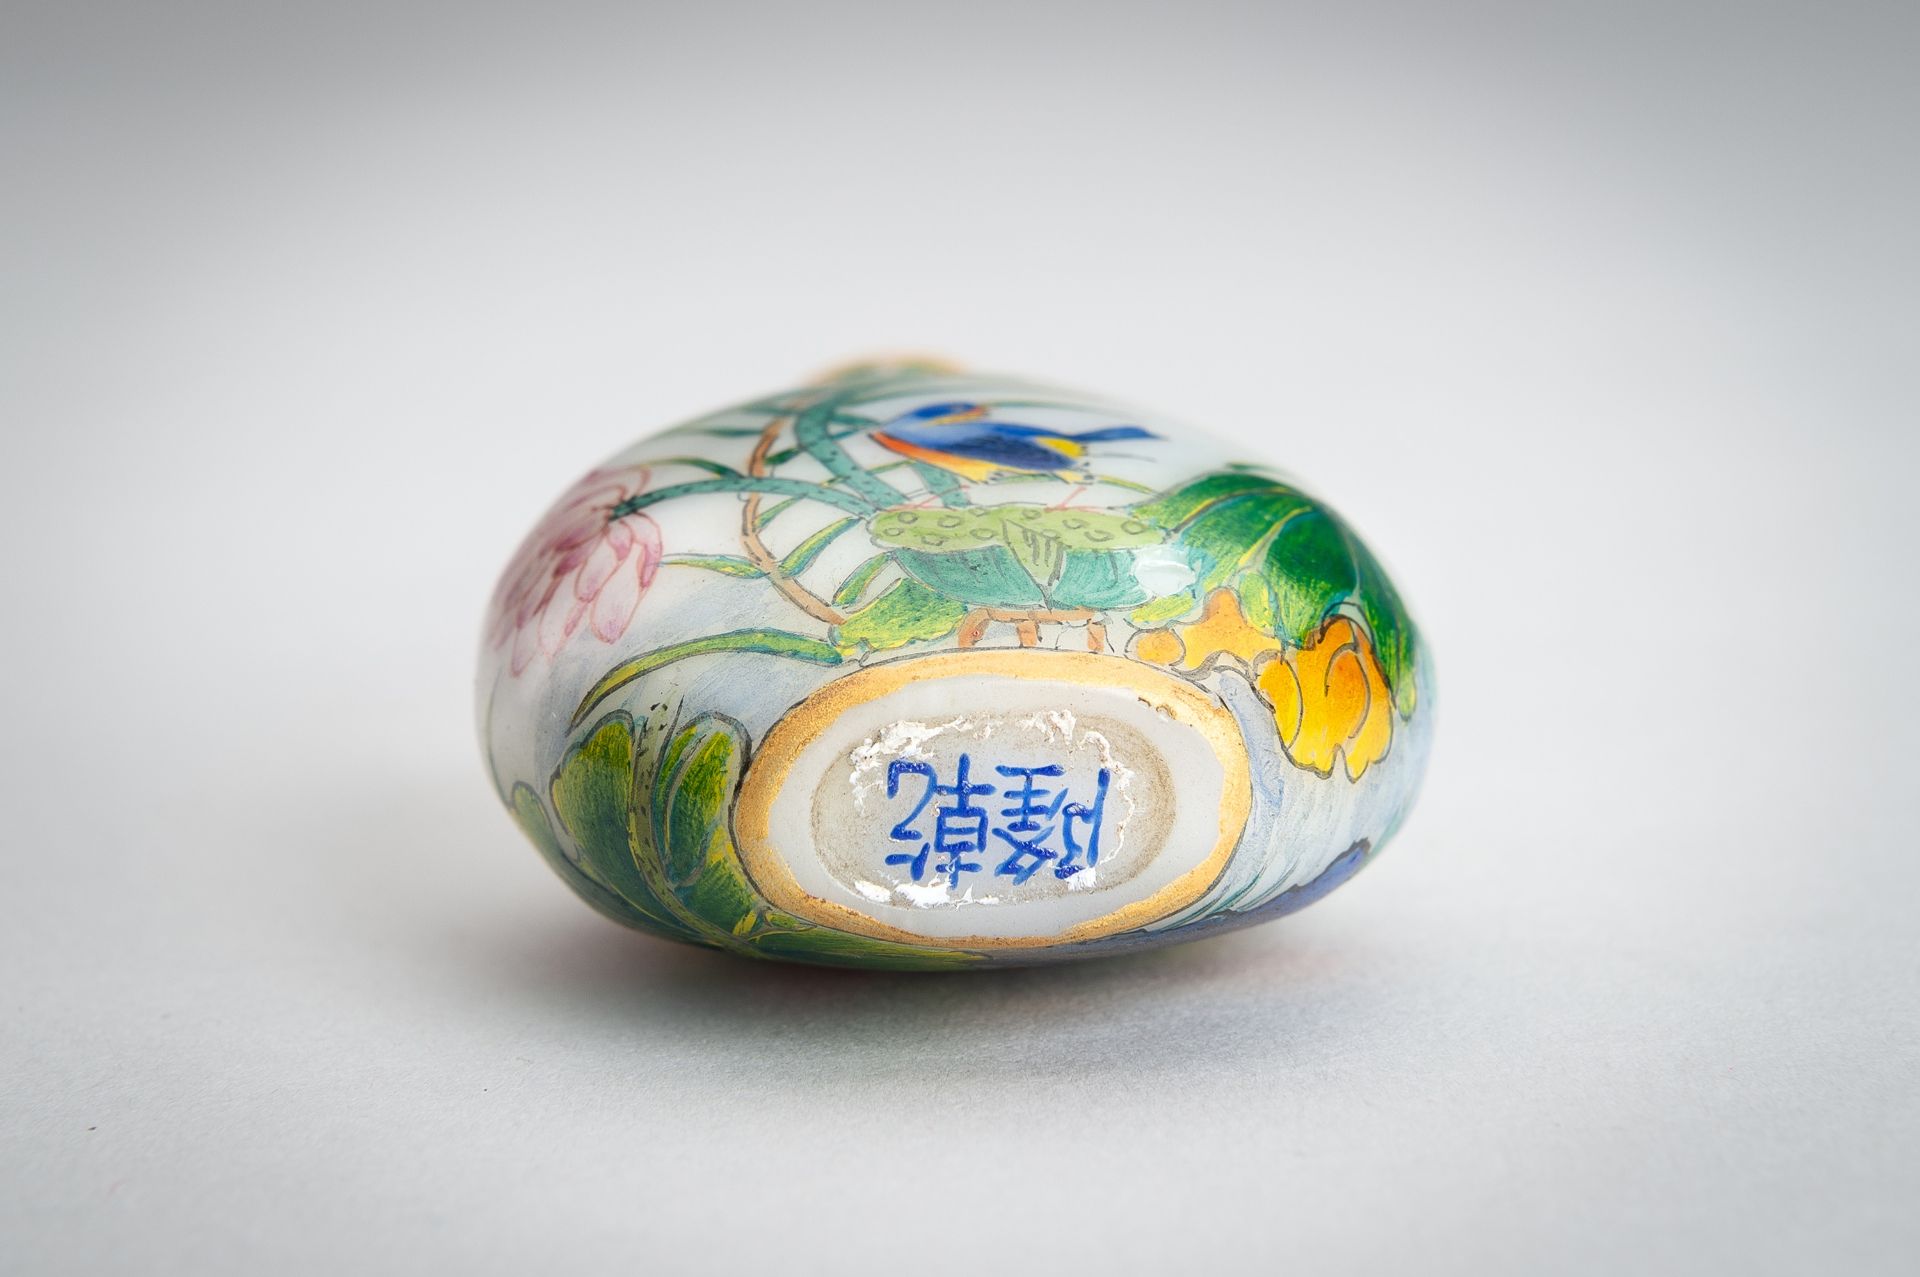 AN ENAMELED GLASS SNUFF BOTTLE WITH FLOWERS AND BIRDS, REPUBLIC - Image 13 of 13